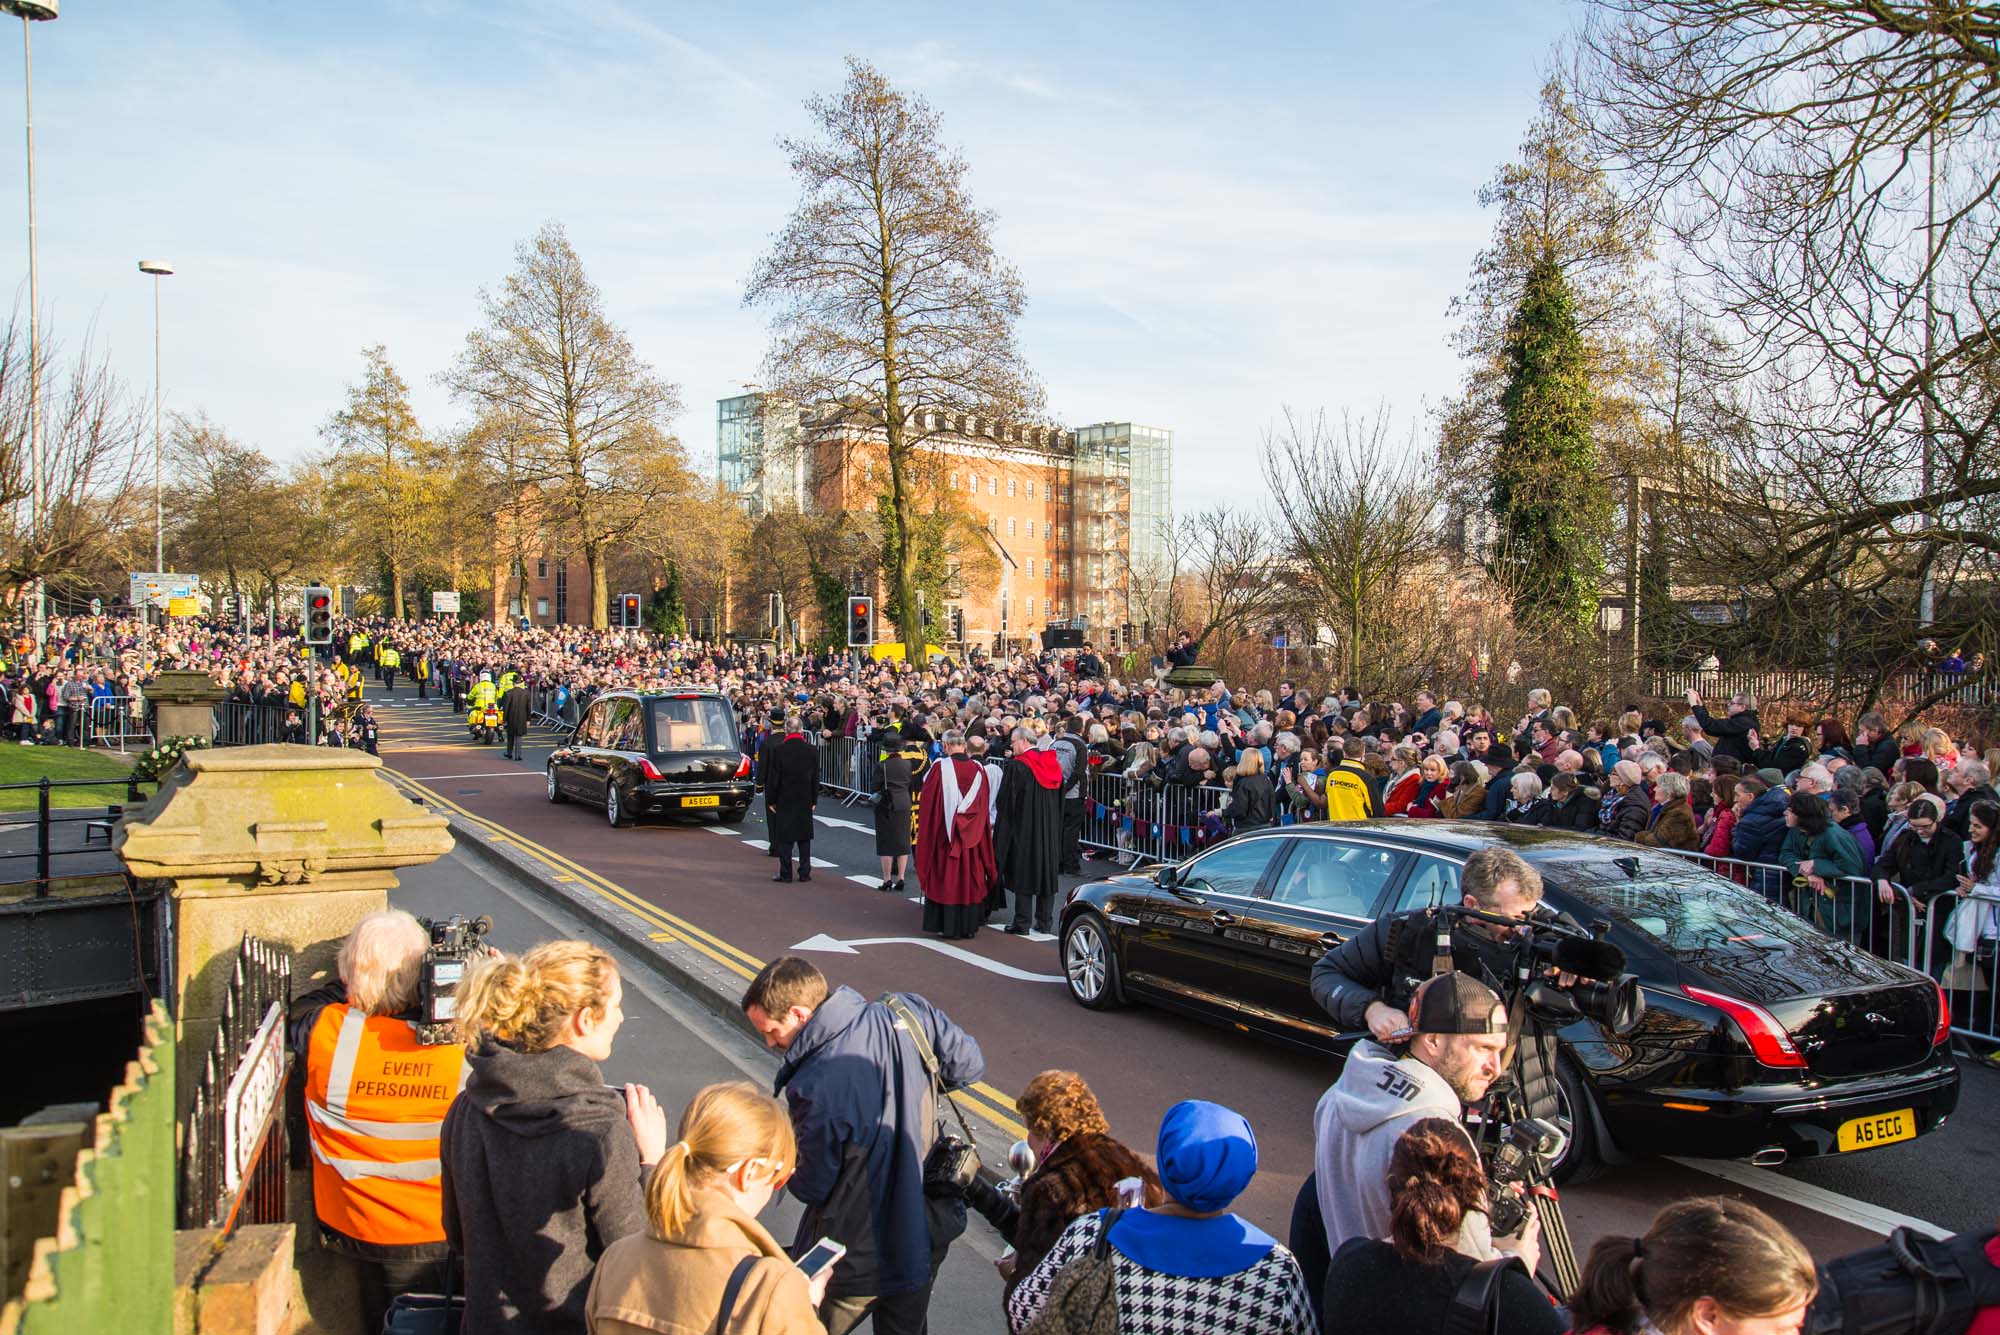 Richard III’s remains passing over the Bow Bridge with large crowds watching, 2015 -